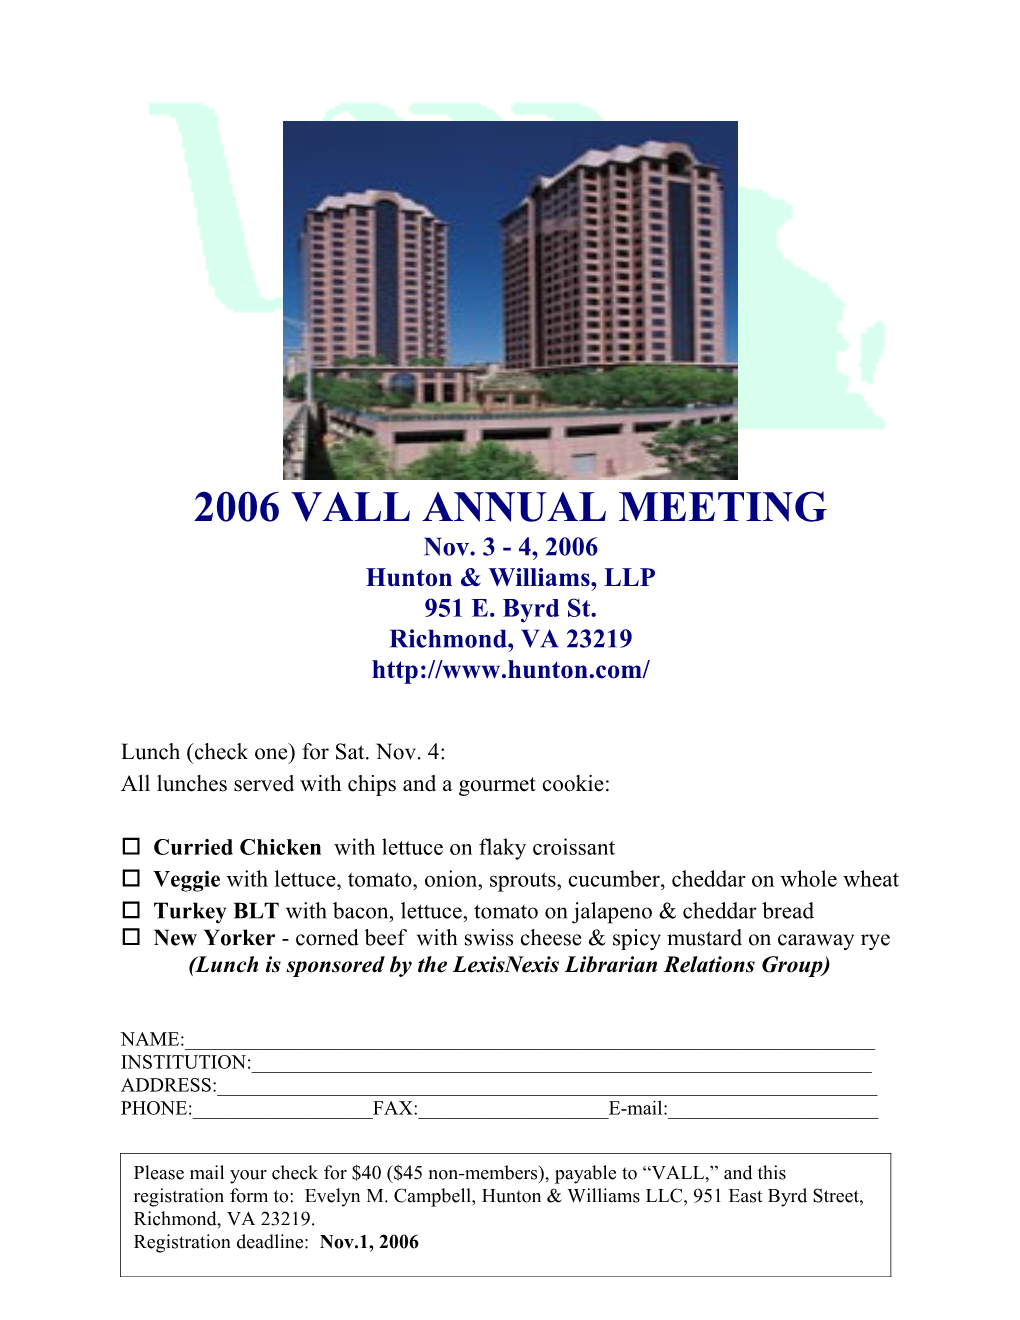 2006 Vall Annual Meeting